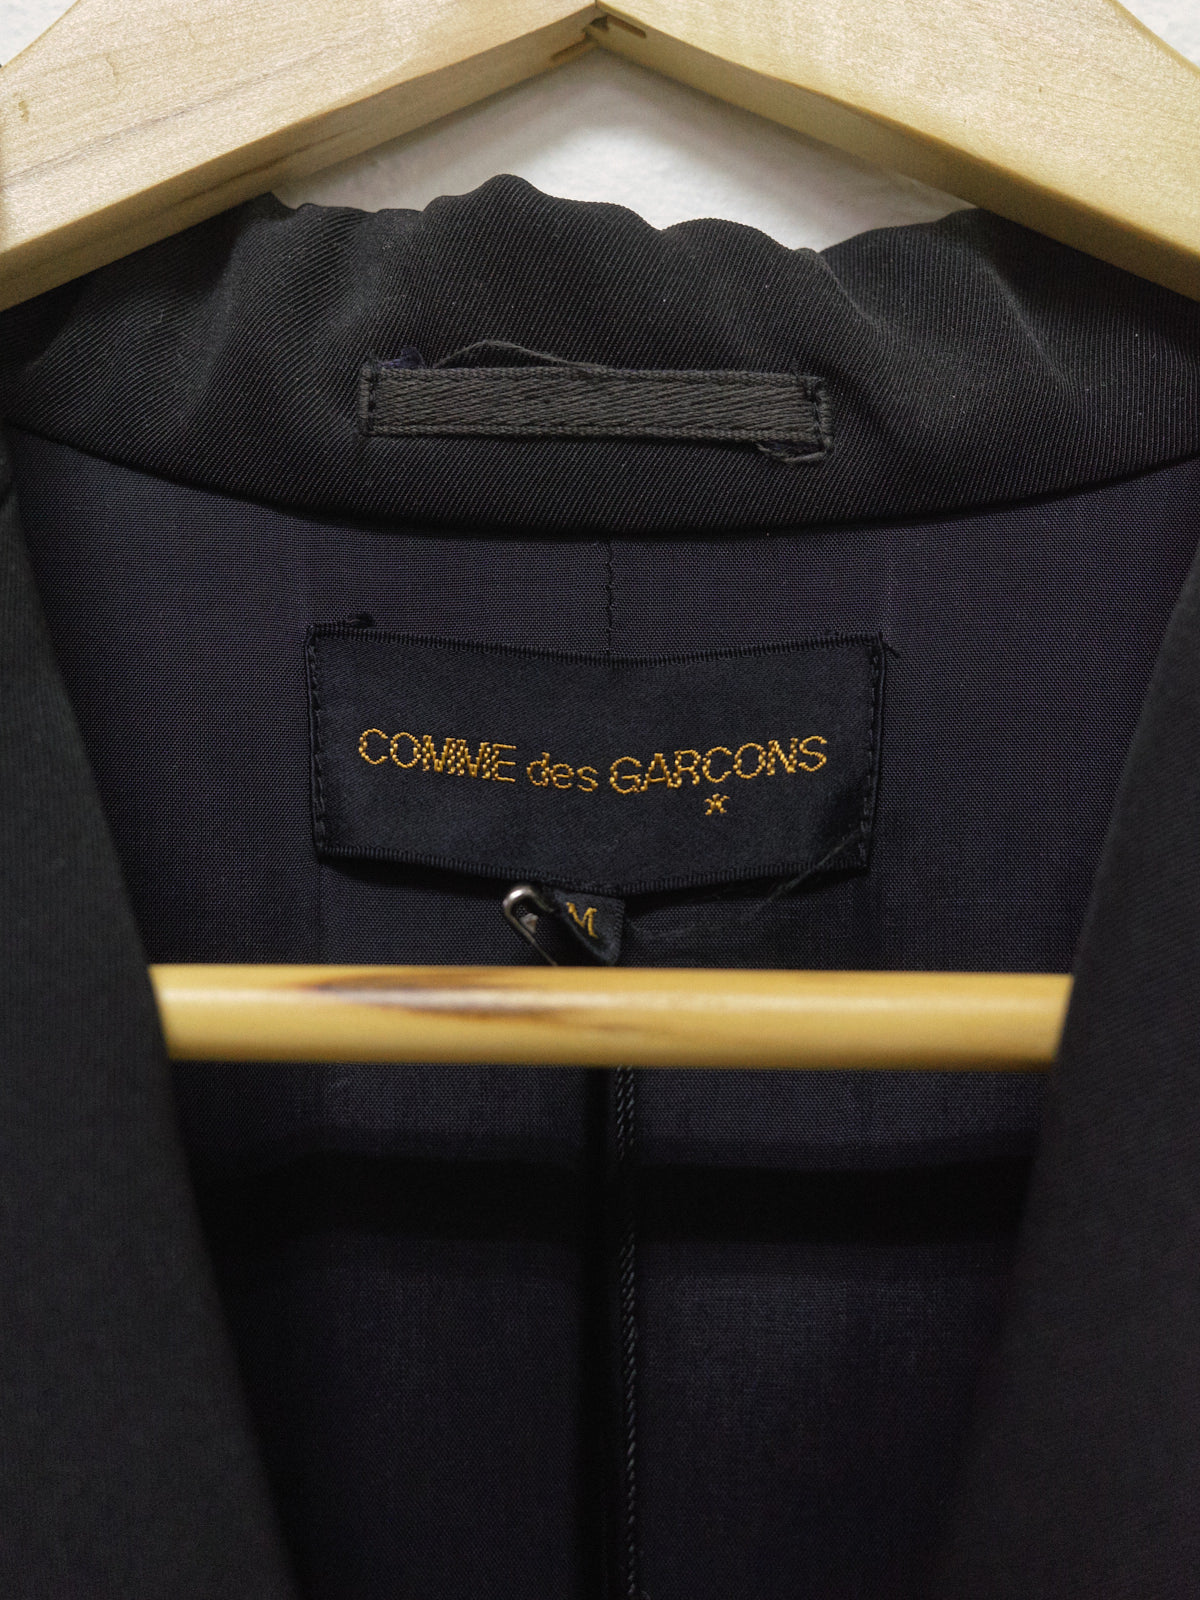 Comme des Garcons 1995 black polyester layered double breasted blazer - womens M